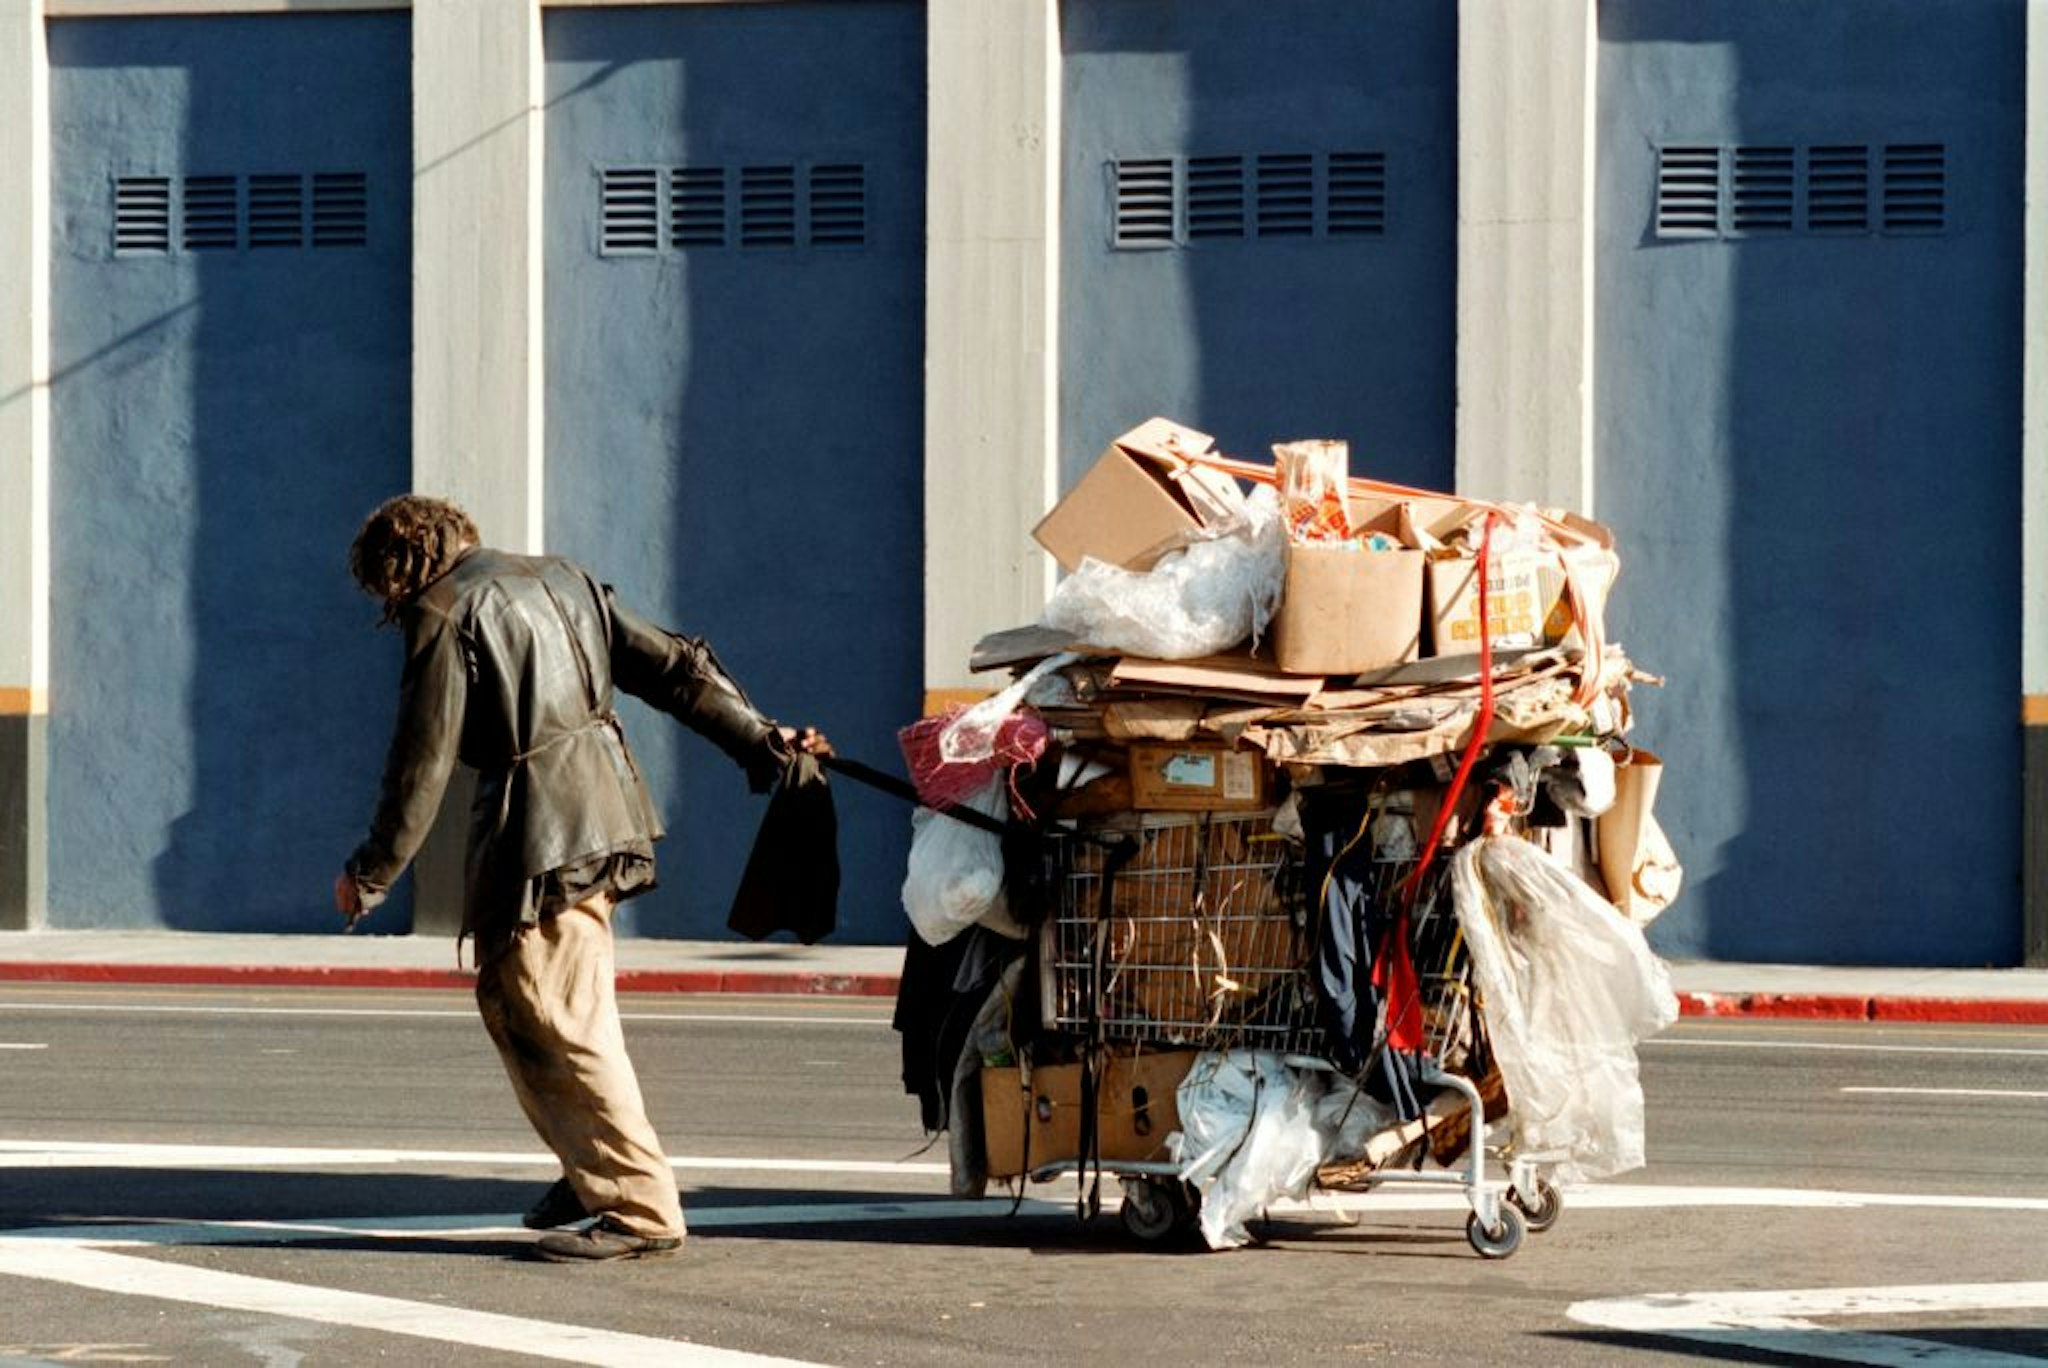 383367 23: A man tows his cart down the street on Skid Row December 11, 2000 in Los Angeles, CA. (Photo by David McNew/Newsmakers)